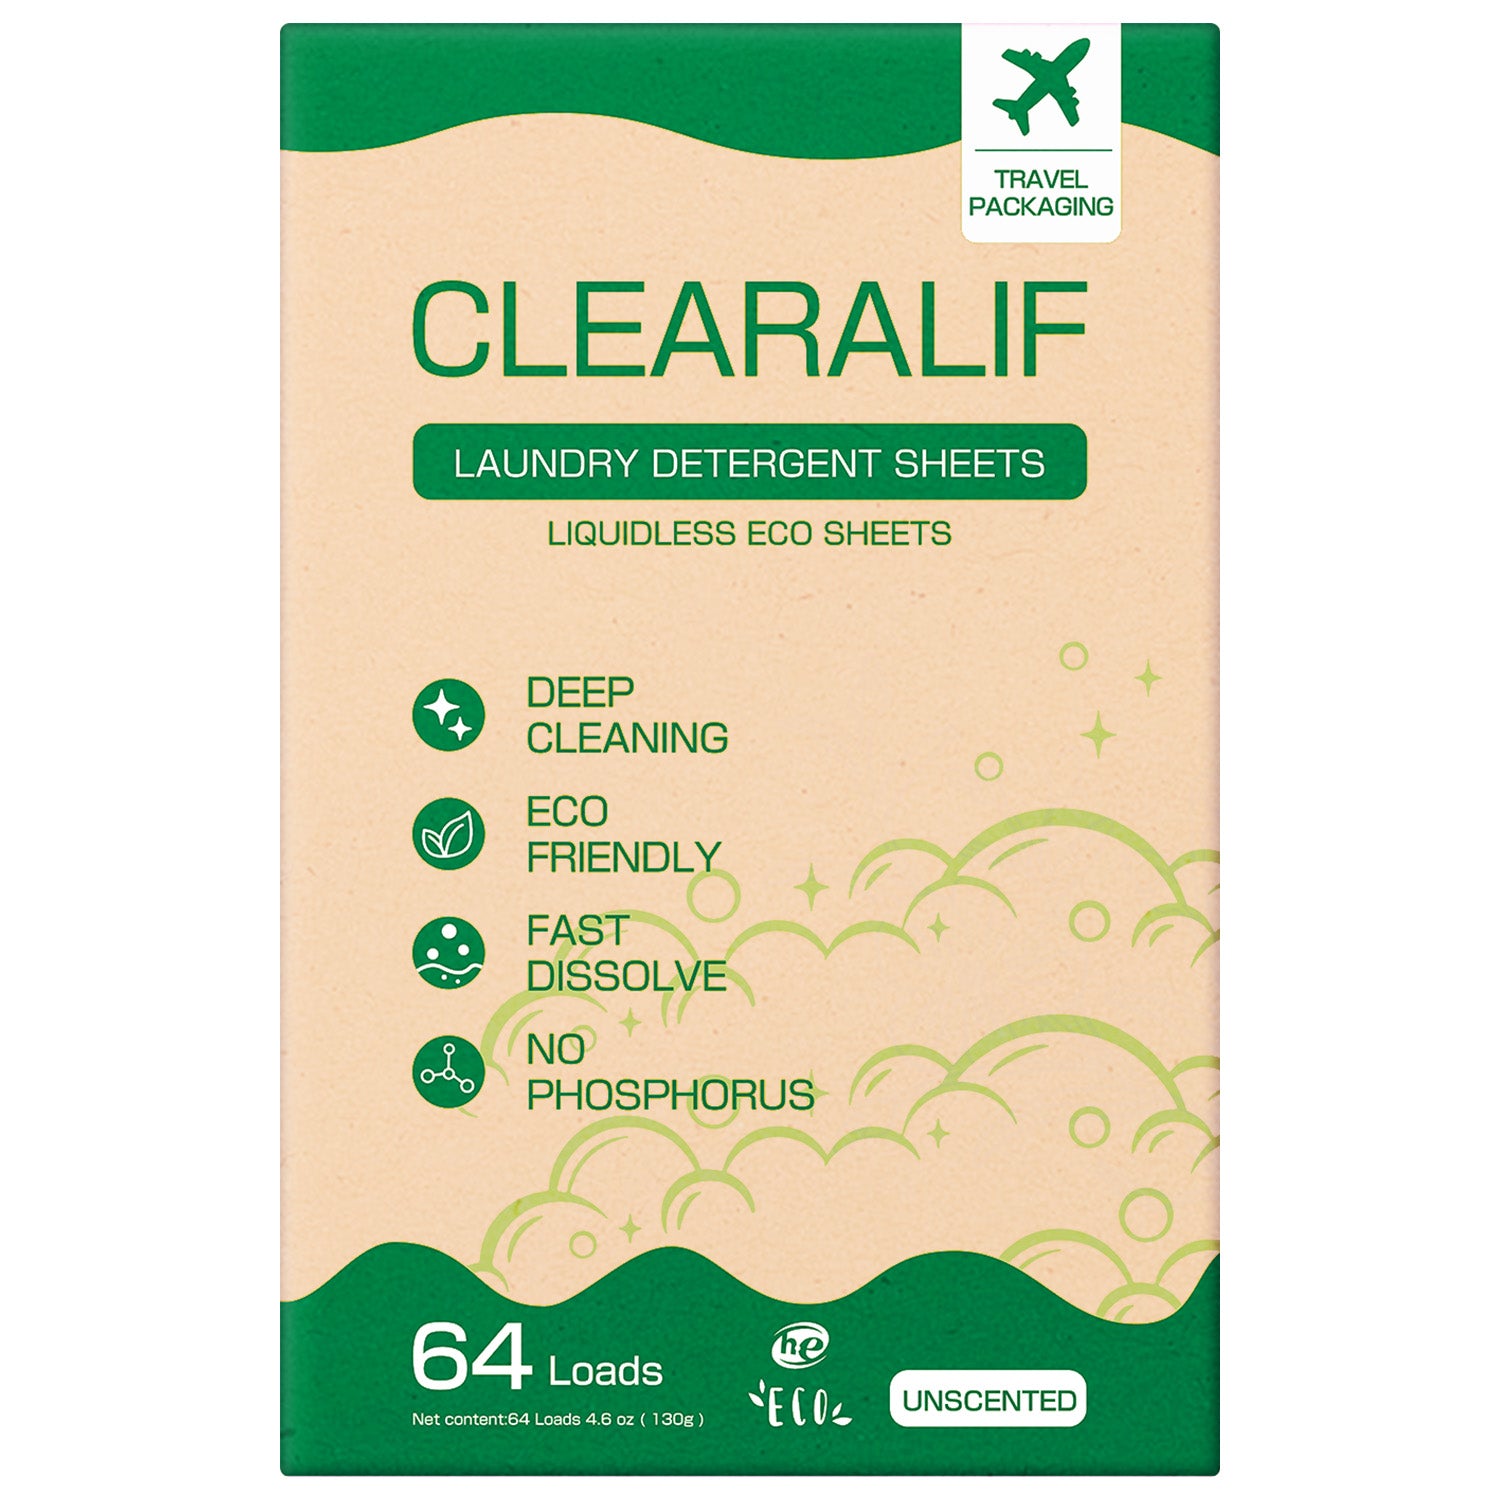 CLEARALIF Eco Friendly & Hypoallergenic Laundry Detergent Sheets 64 Loads, Fresh Liene